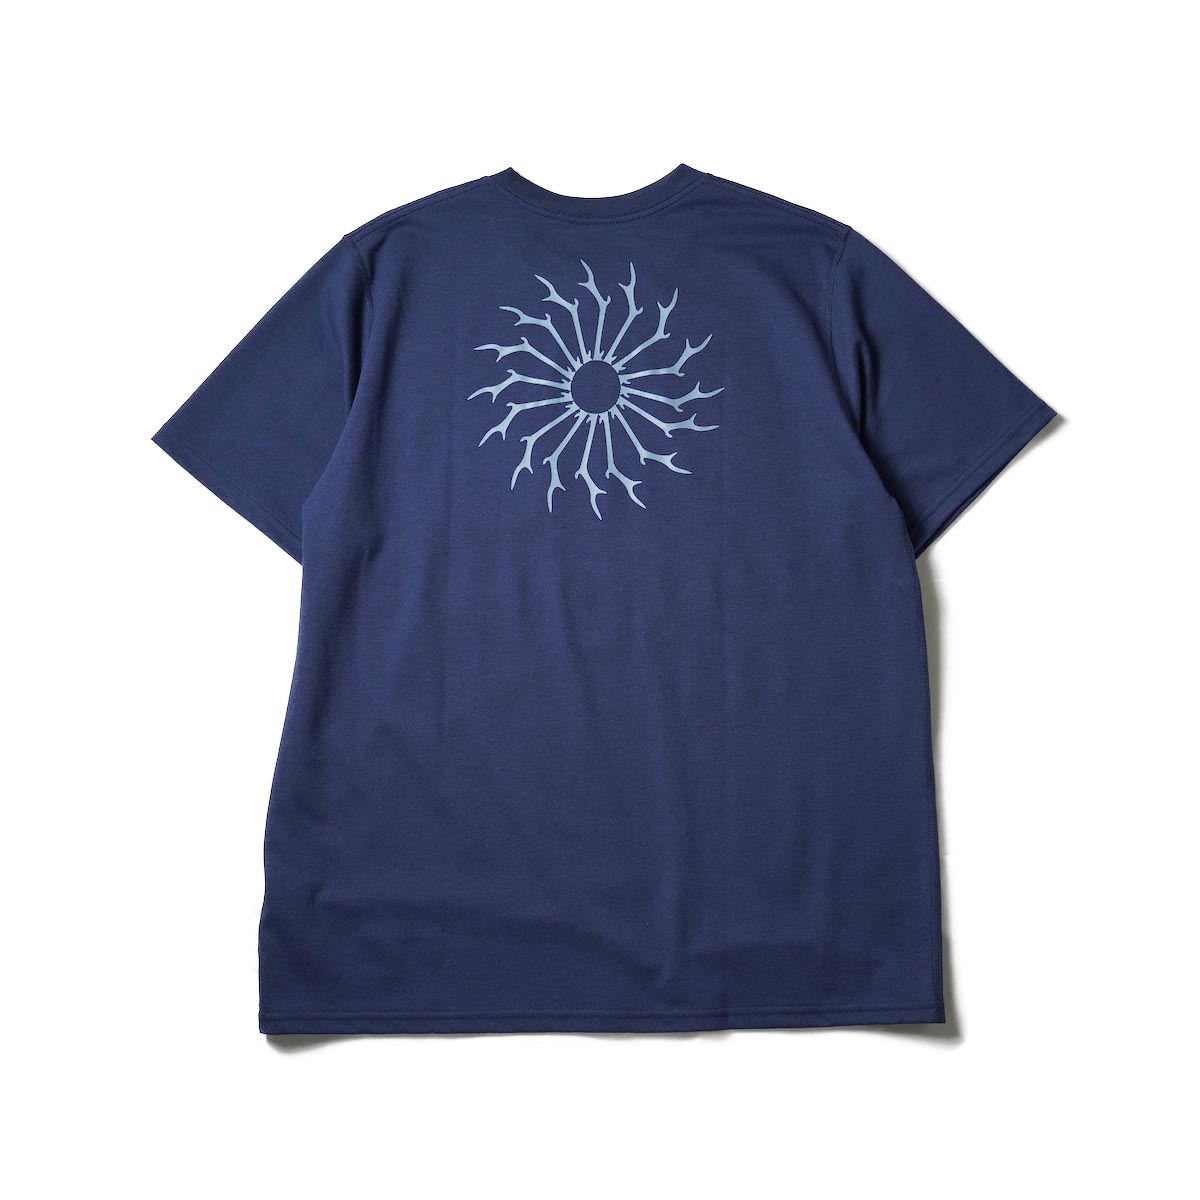 South2 West8 / S/S ROUND POCKET TEE - CIRCLE HORN (Navy)